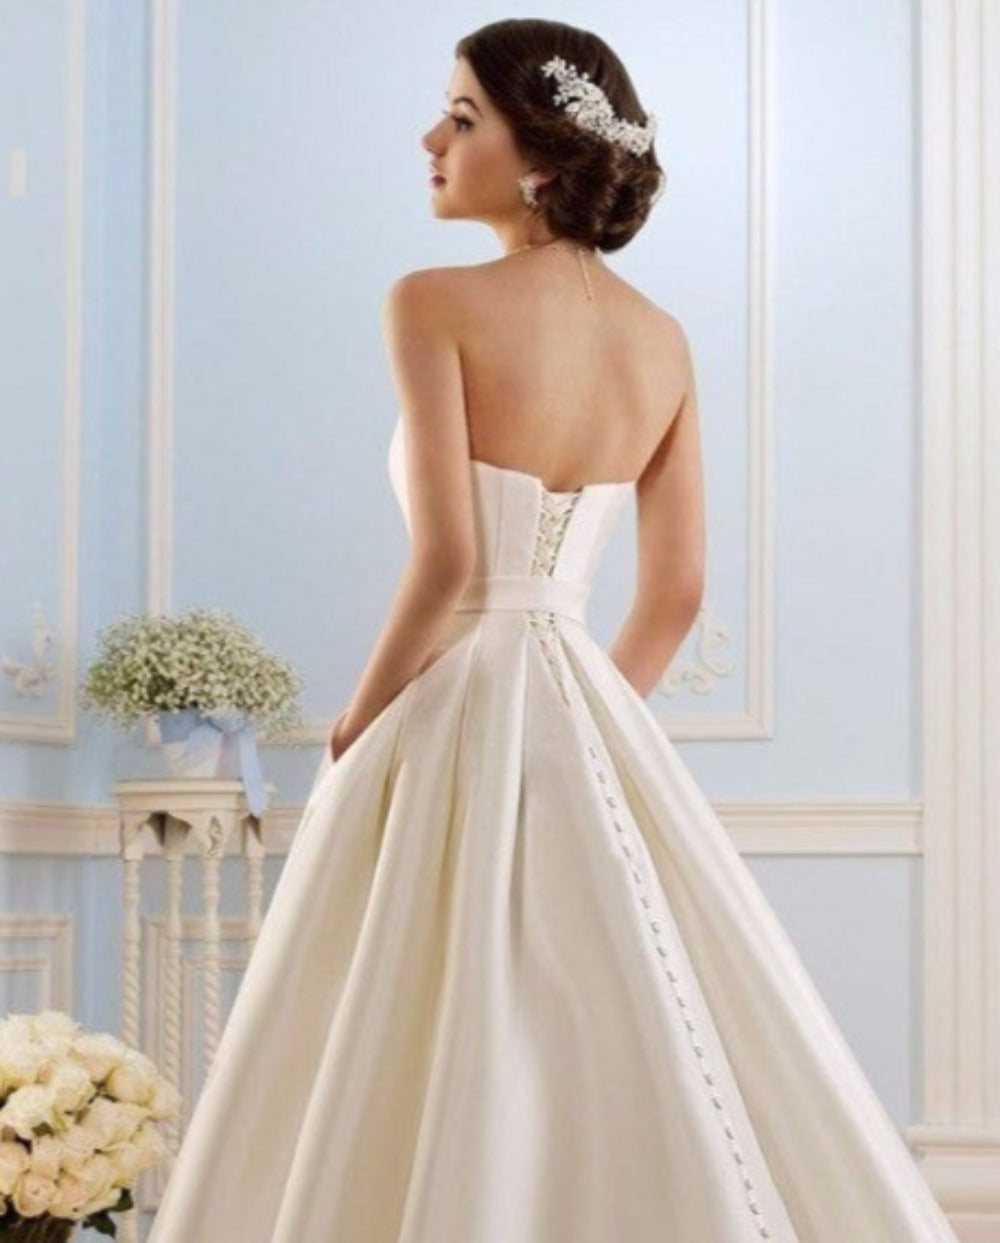 Women's Vintage A-Line Wedding Dress With Pockets